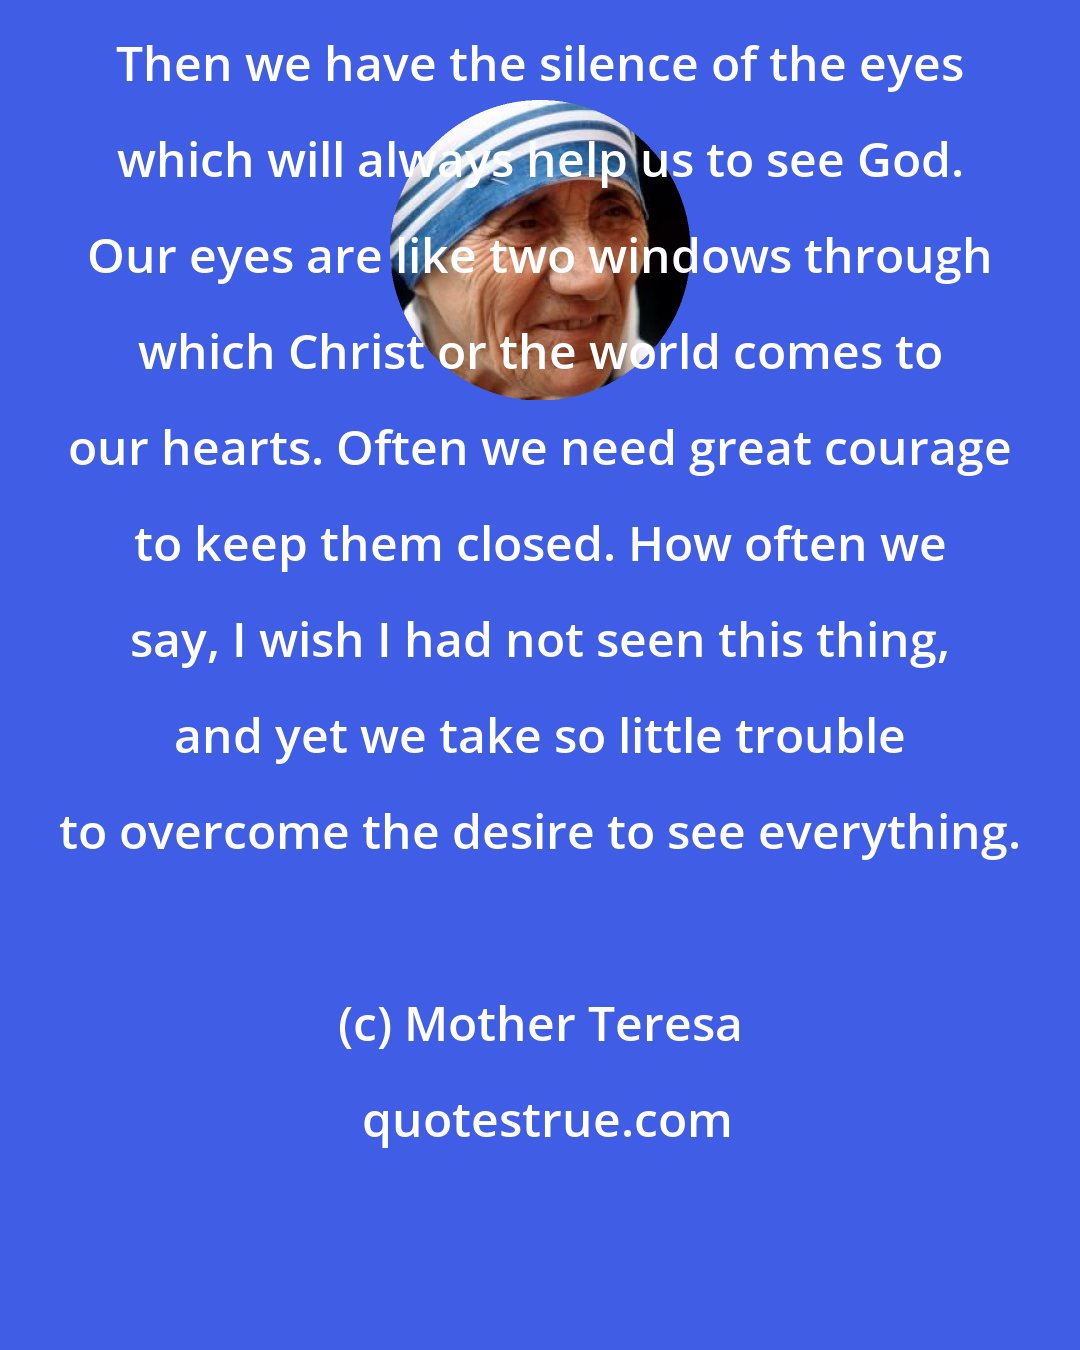 Mother Teresa: Then we have the silence of the eyes which will always help us to see God. Our eyes are like two windows through which Christ or the world comes to our hearts. Often we need great courage to keep them closed. How often we say, I wish I had not seen this thing, and yet we take so little trouble to overcome the desire to see everything.